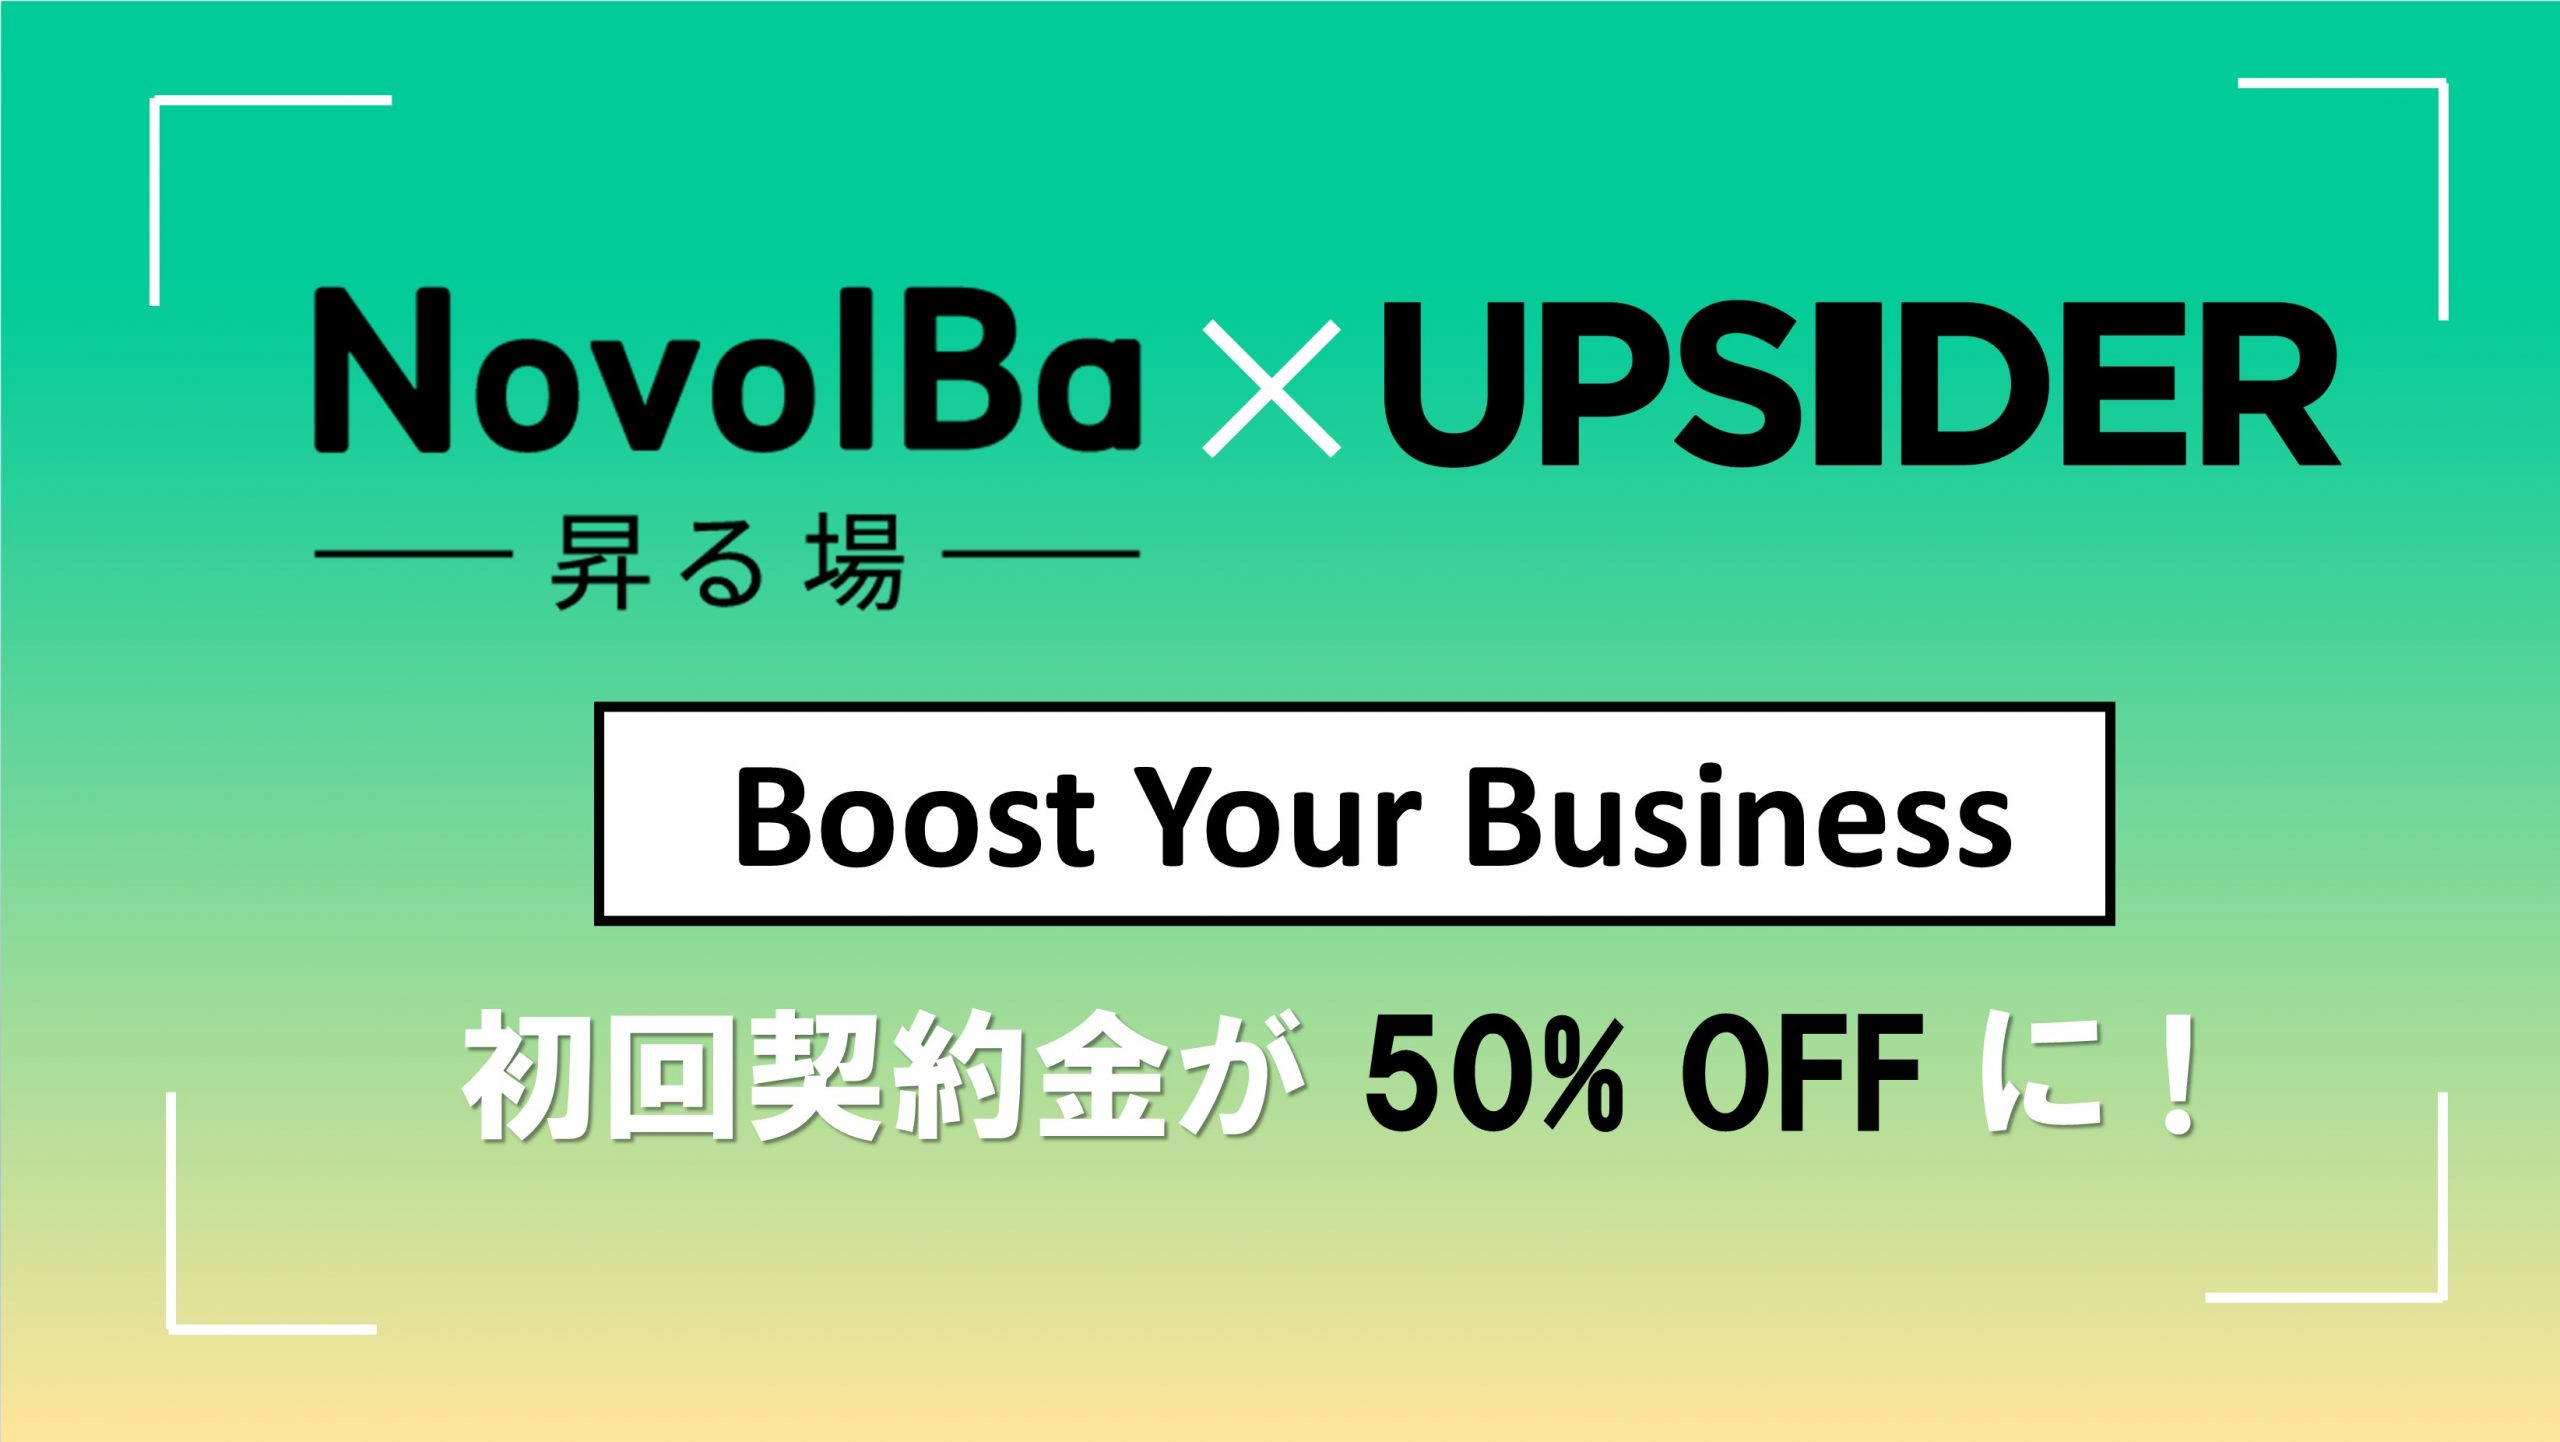 NovolBaxUpsider-Boost-Your-Business